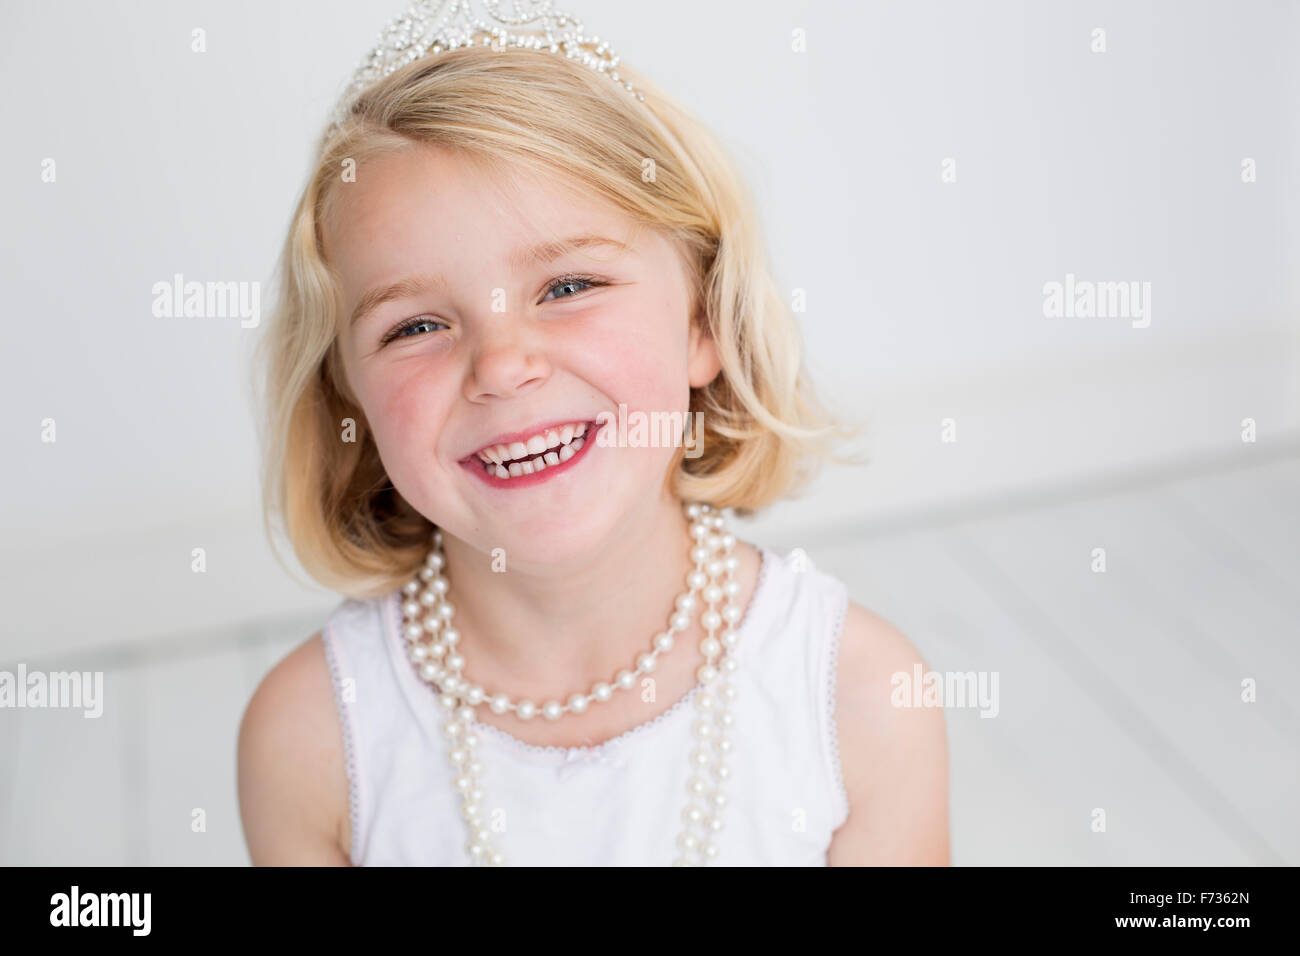 Young girl wearing a tiara and a pearl necklace, posing for a picture in a photographers studio. Stock Photo